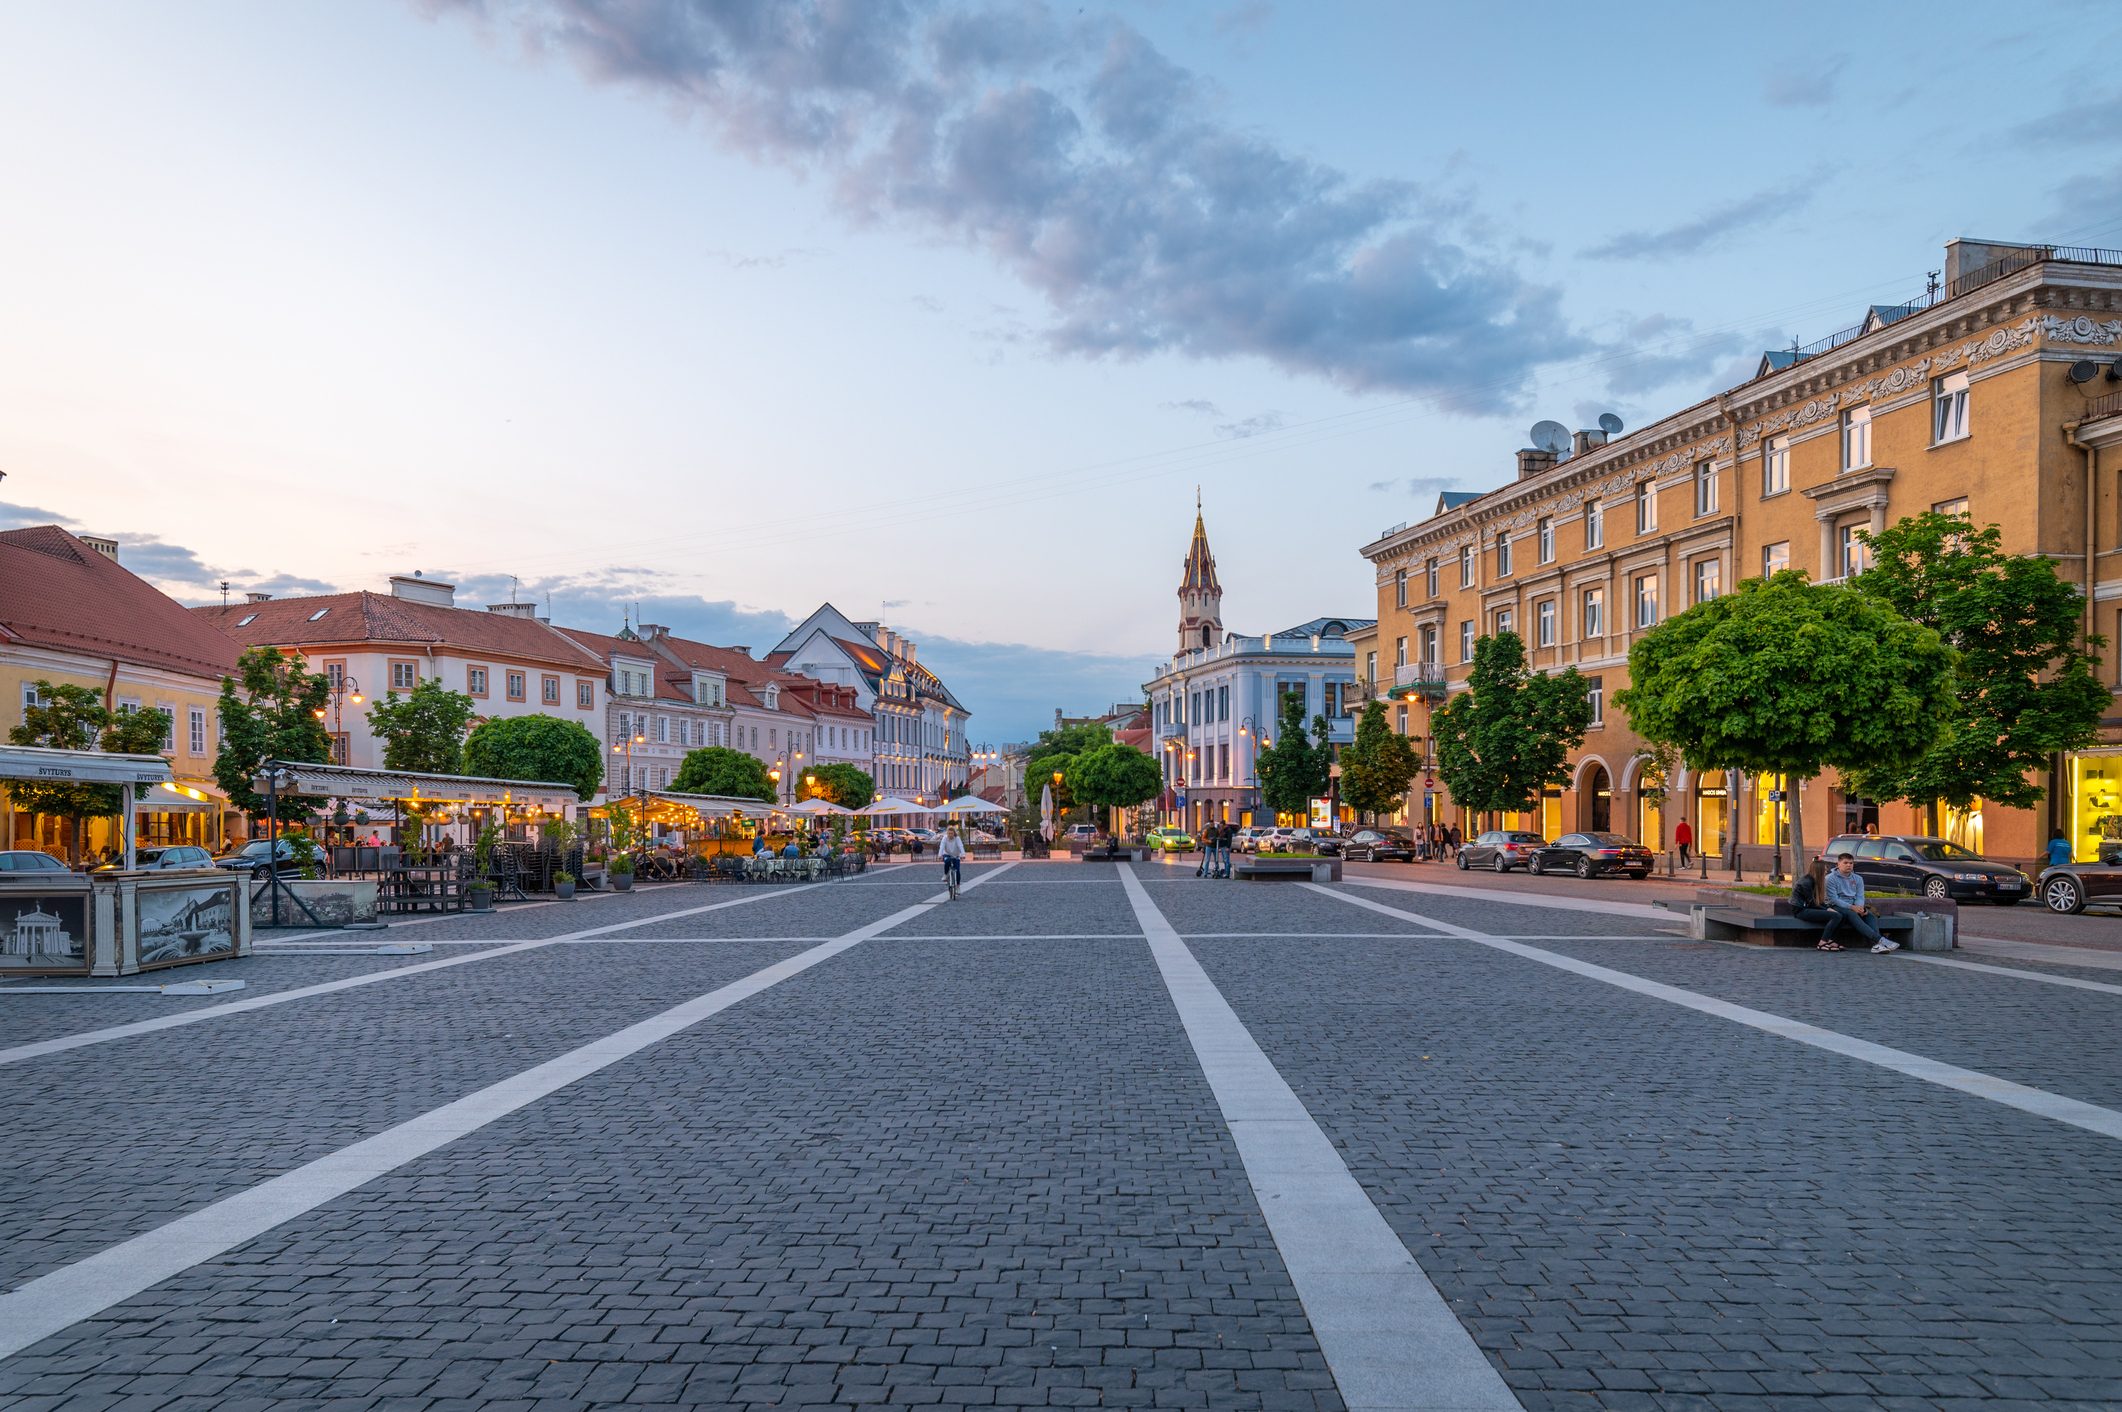 <p class=""><strong>Best for: </strong>Attractions</p> <p>Another Eastern European gem, the Lithuanian city of Vilnius offers great value for your money as soon as you step off the plane. Just taking the train from Vilnius Airport to the city's center is only 89 cents. But it's not just <a href="https://www.rd.com/list/travel-cheap/" rel="noopener noreferrer">bargain-price travel</a> that make this an appealing destination. The survey found that Vilnius had the best-rated attractions, earning it a rating of 4.66 out of 5 for the quality of things to do there. You'll find a mix of museums, gardens and historic sites, including a Baroque-architecture-filled Old Town. And don't miss the 16th-century Gates of Dawn, which contain an icon from the Virgin Mary.</p> <p class="listicle-page__cta-button-shop"><a class="shop-btn" href="https://www.tripadvisor.com/Hotel_Review-g274951-d290868-Reviews-Rinno_Hotel-Vilnius_Vilnius_County.html">Book a Hotel</a></p>